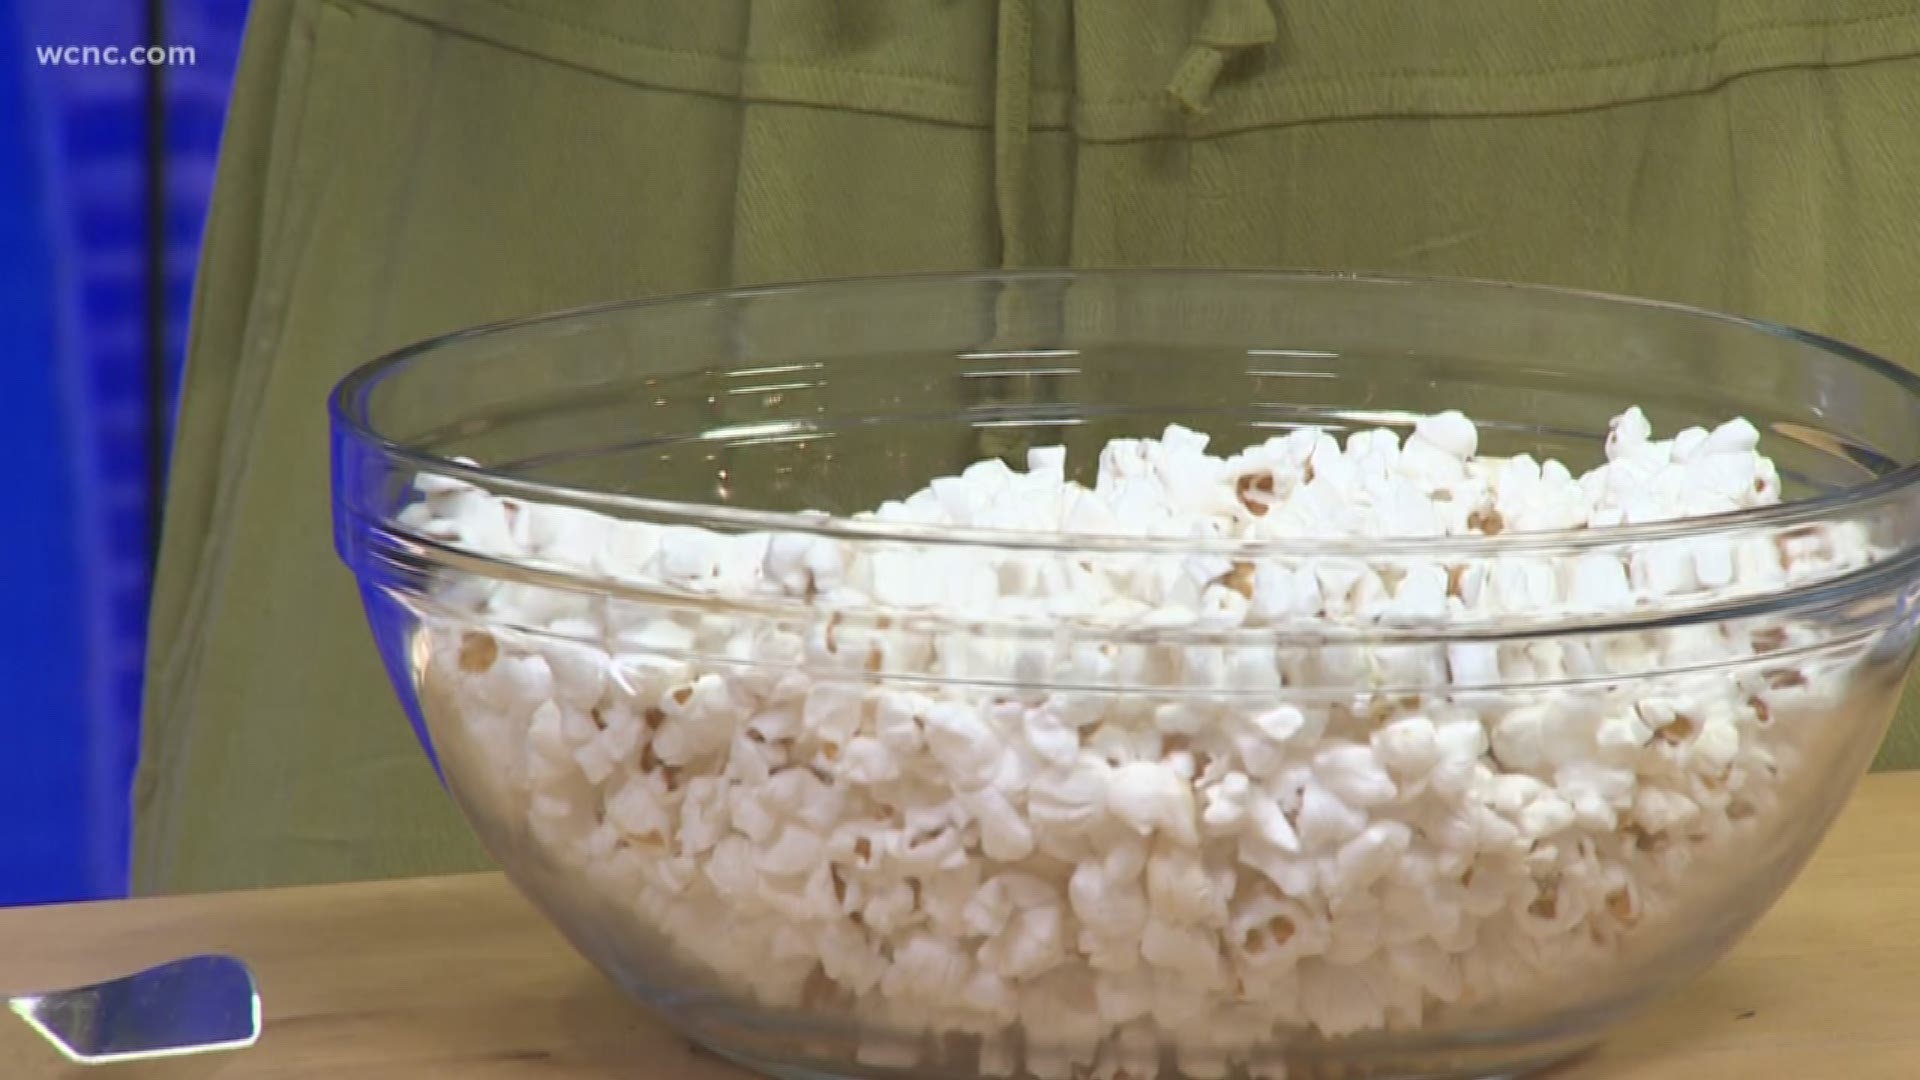 Elevate your movie night by making delicious popcorn. Alisha Kaiser with Table Fix shows us how to make rosemary, sea salt and olive oil popcorn.